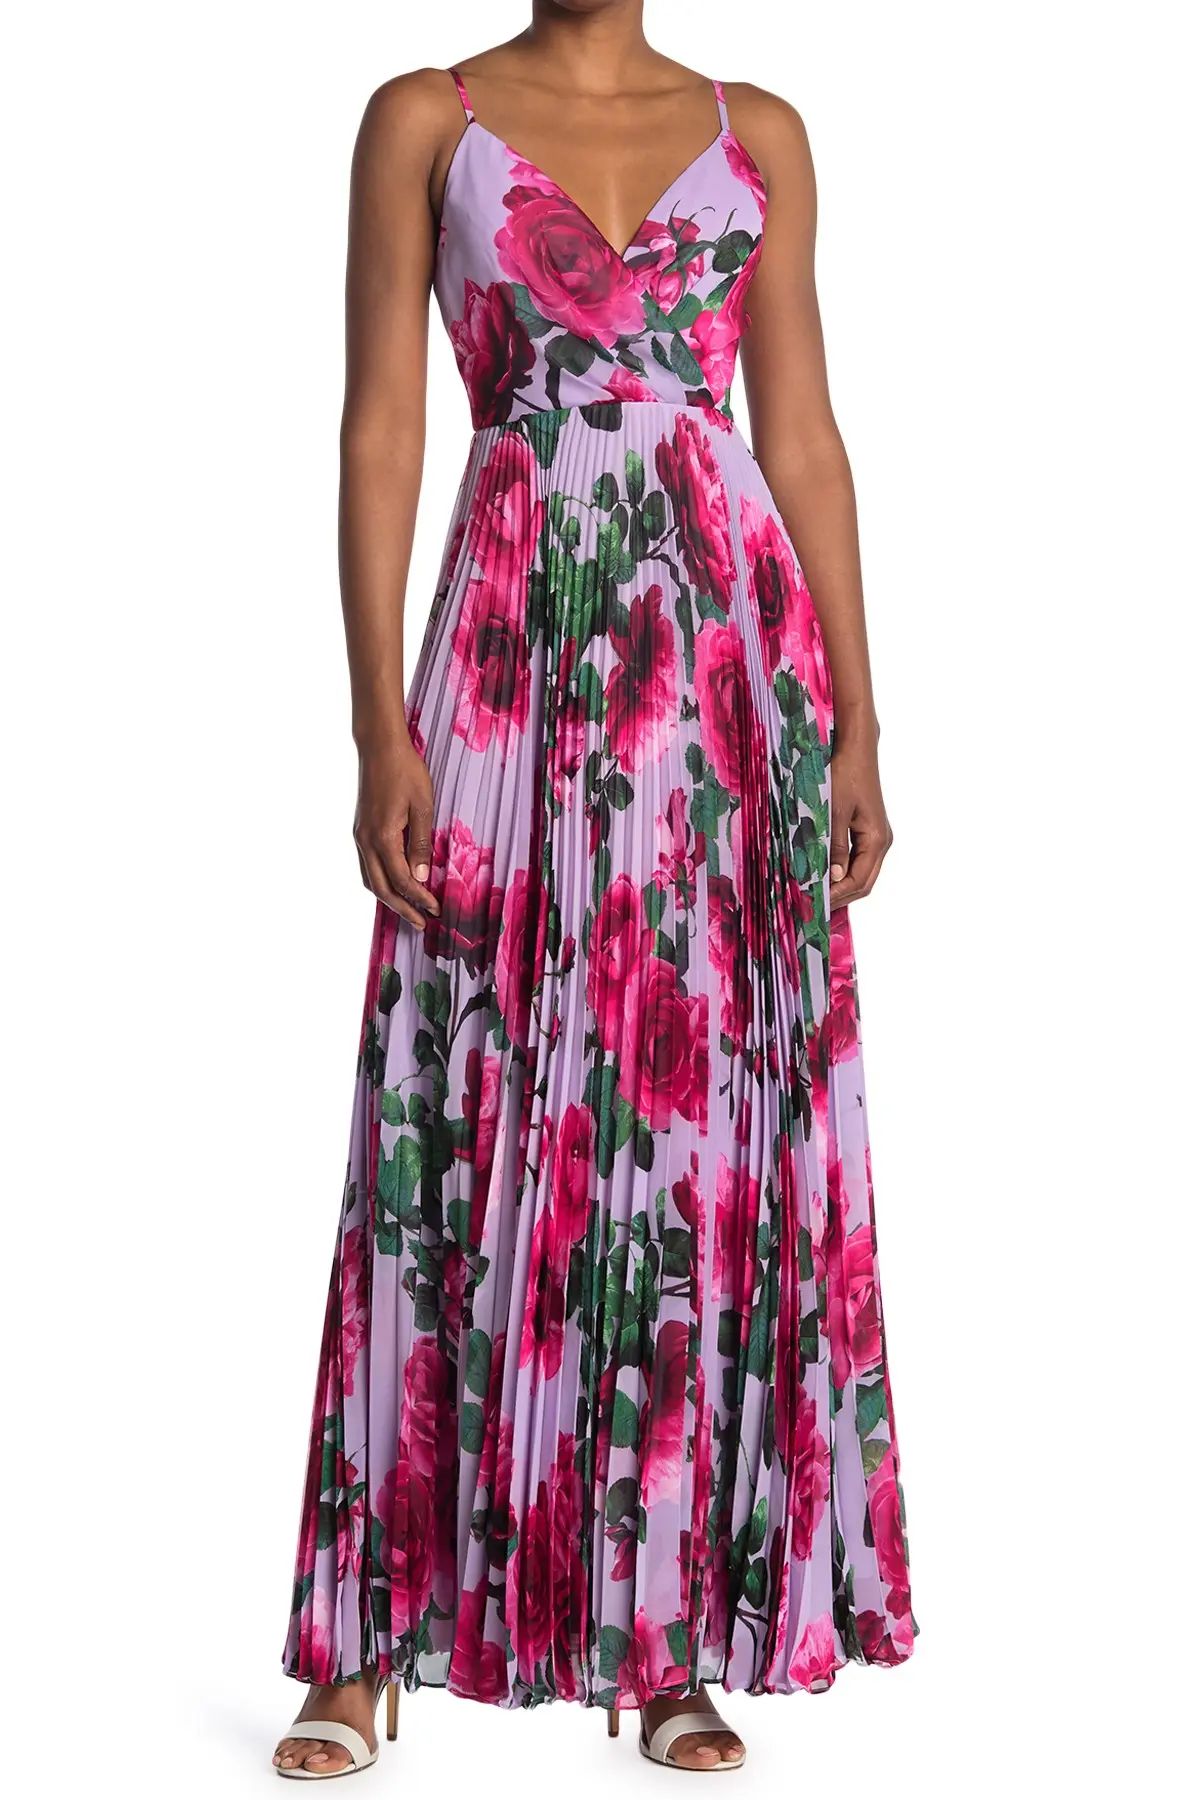 Laundry By Shelli Segal | Roe Floral Pleated Maxi Dress | Nordstrom Rack | Nordstrom Rack